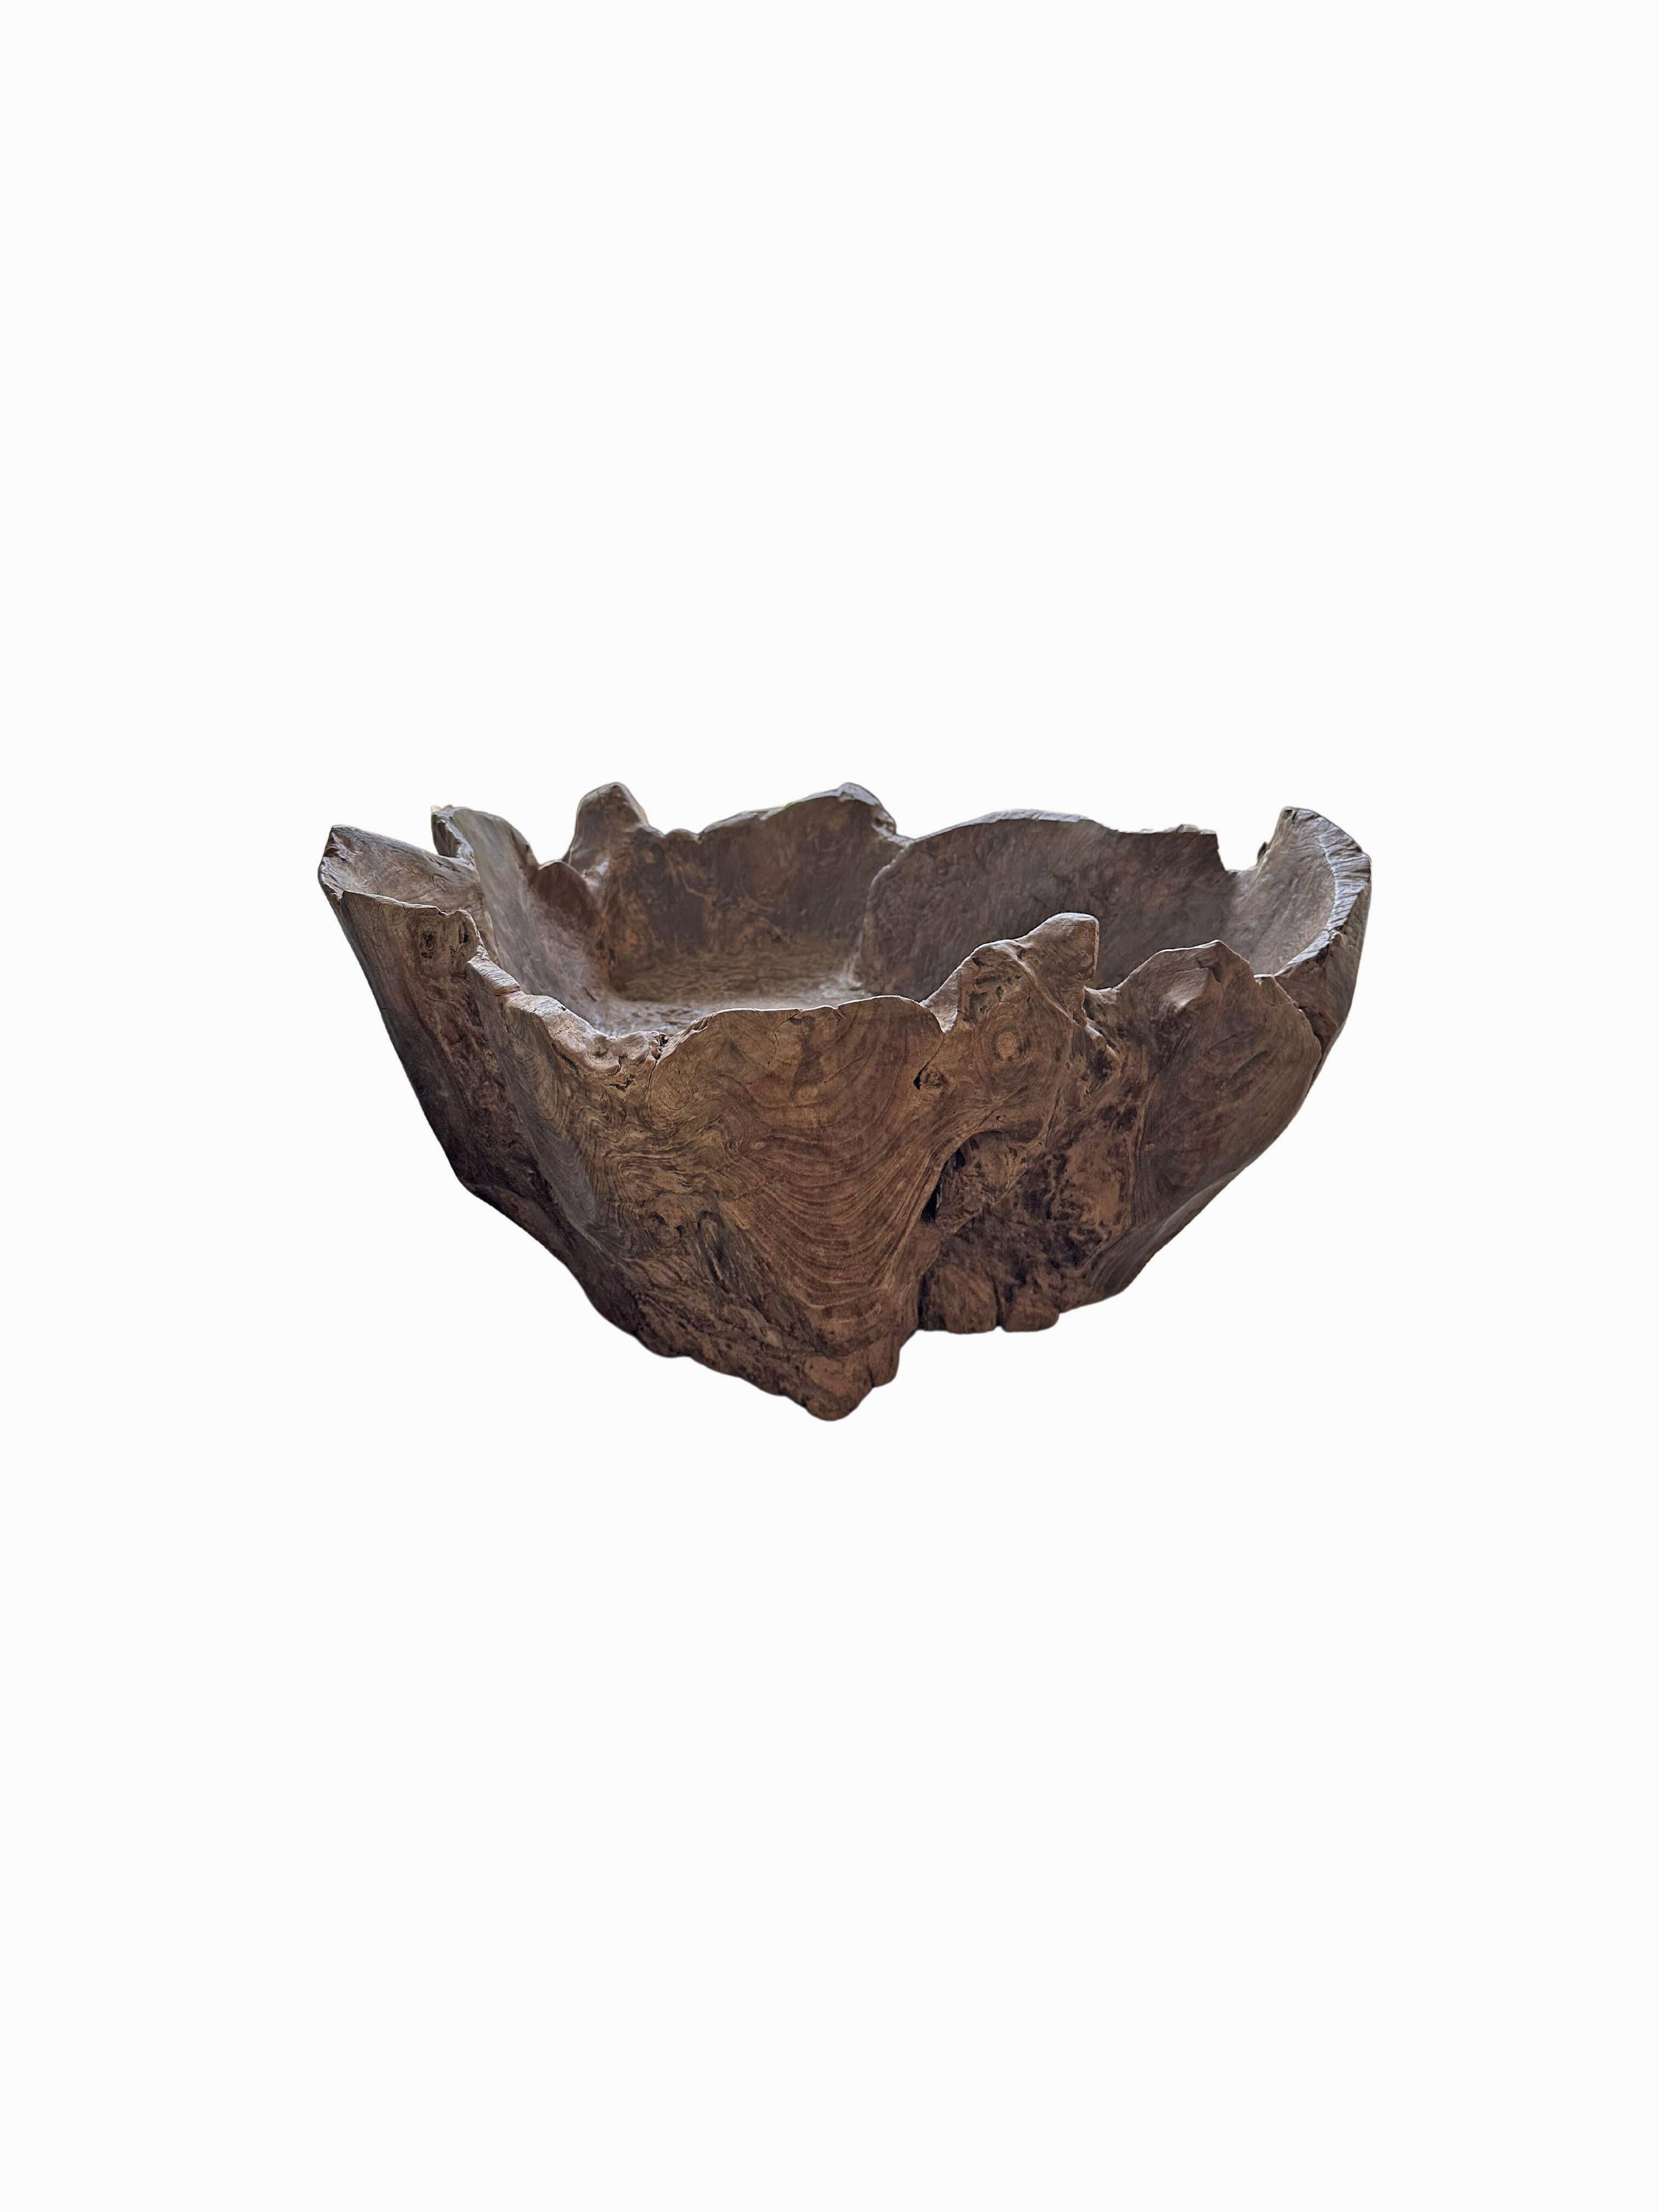 Solid Sculptural Teak Wood Bowl with abstract form, Modern Organic For Sale 1